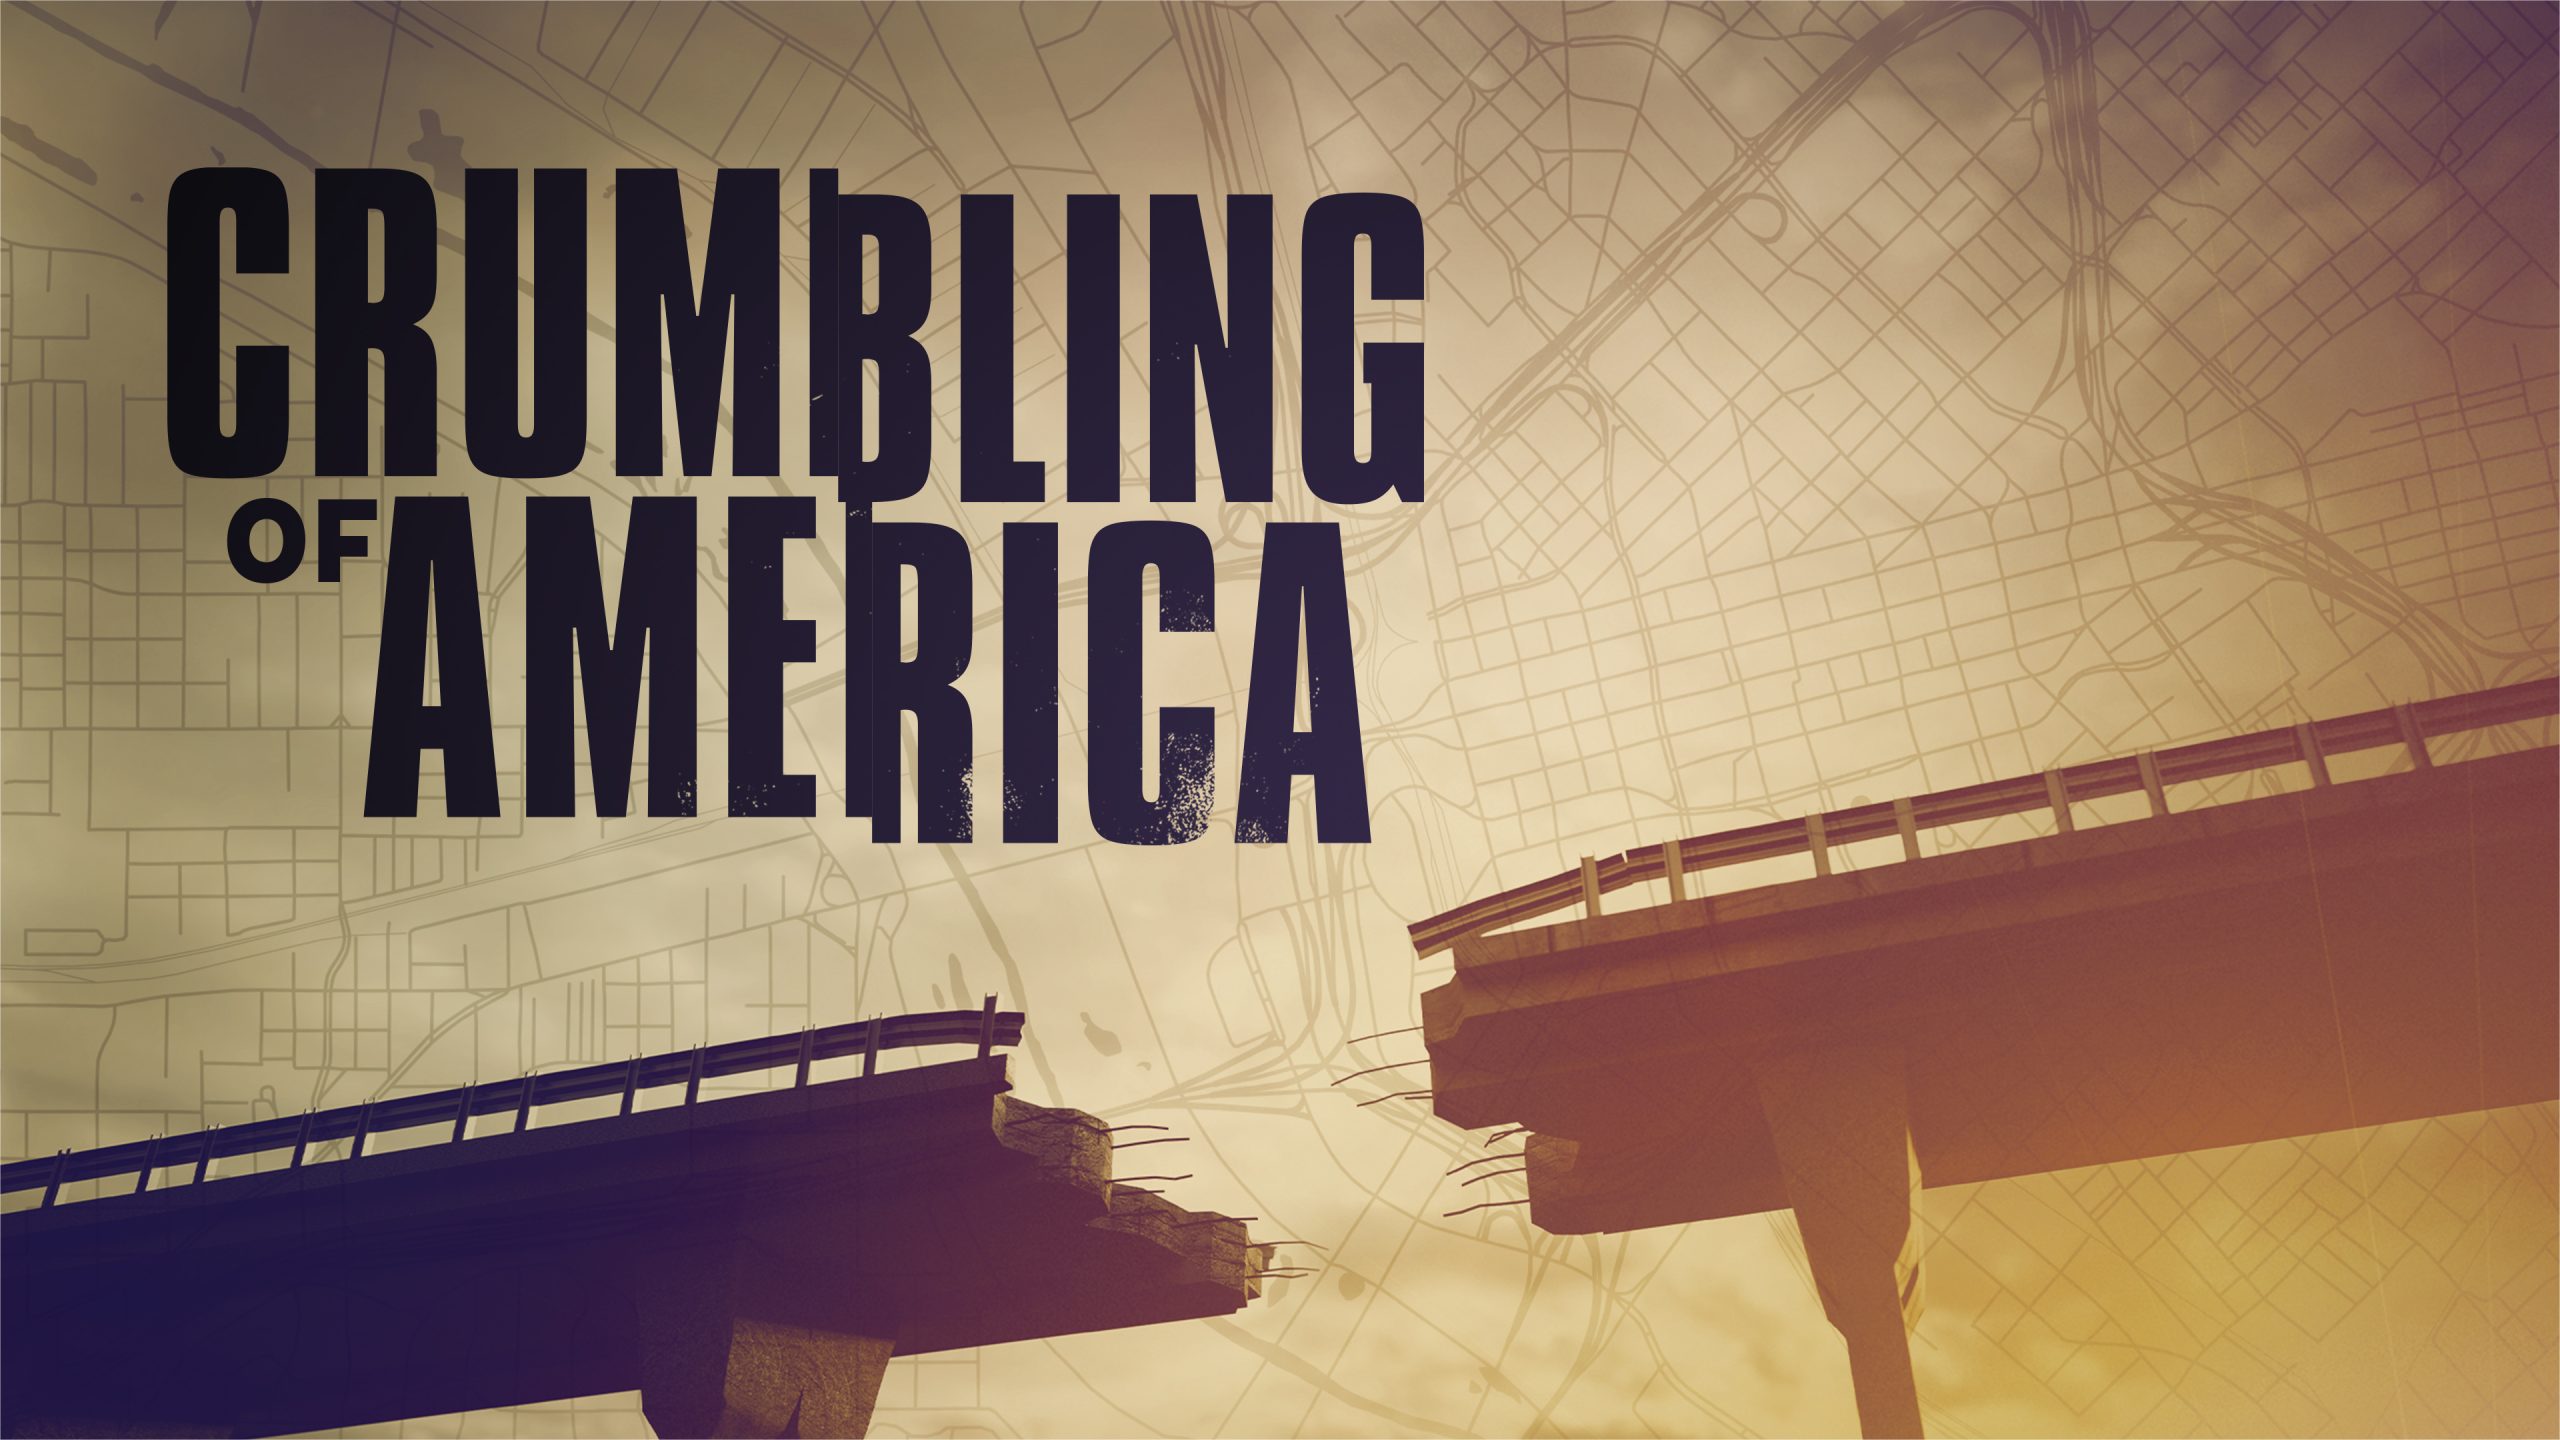 Watch ‘Crumbling of America’ on HISTORY Vault